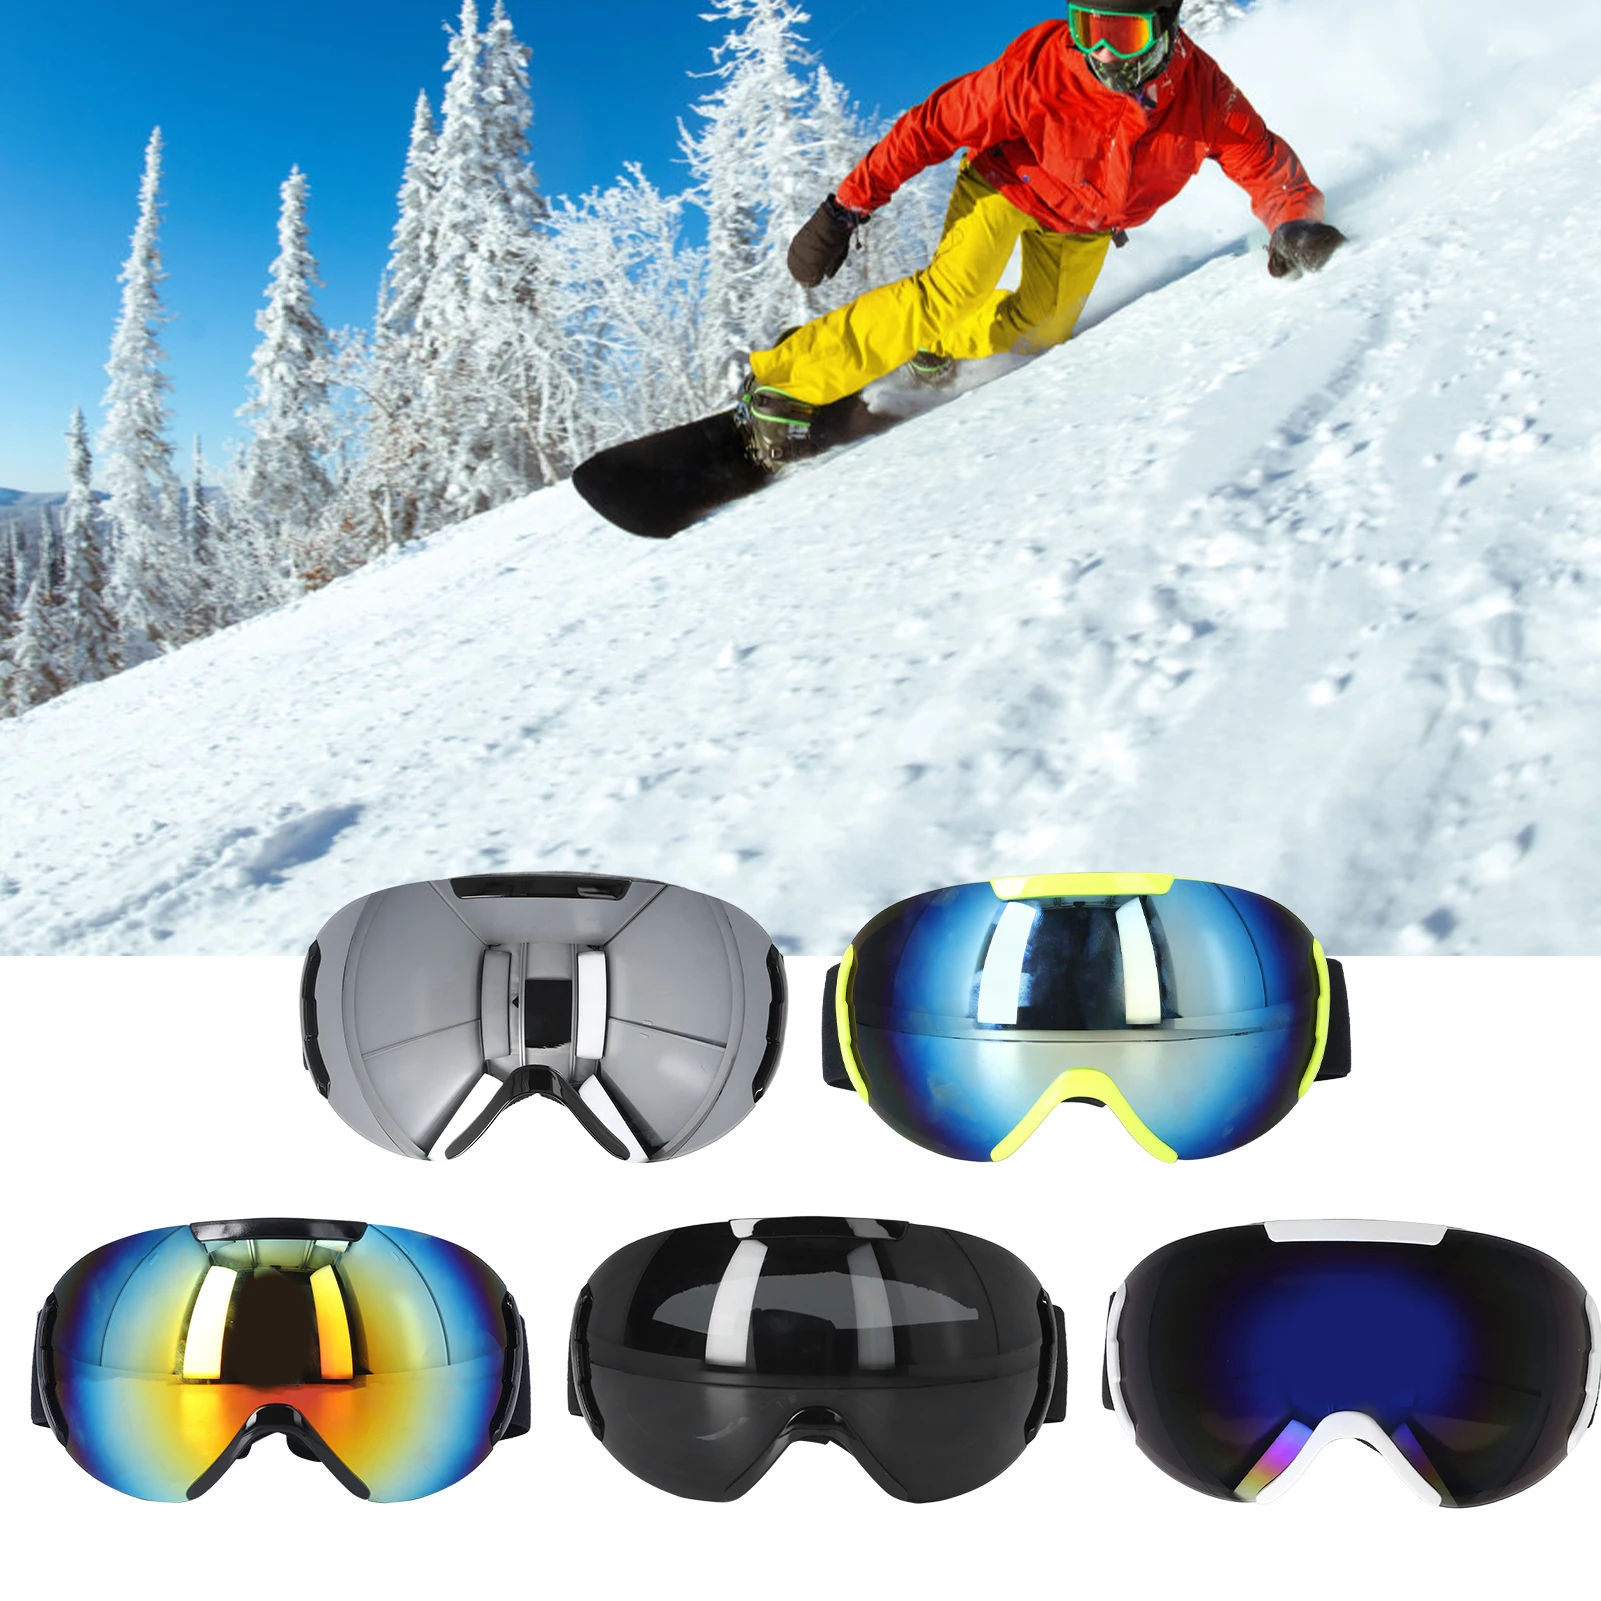 

Skiing Goggles PE Coated Lens Anti Fog Double Layers Wide View Adjustable Frameless Winter Skiing Climb Mountain Glasses Eyewear